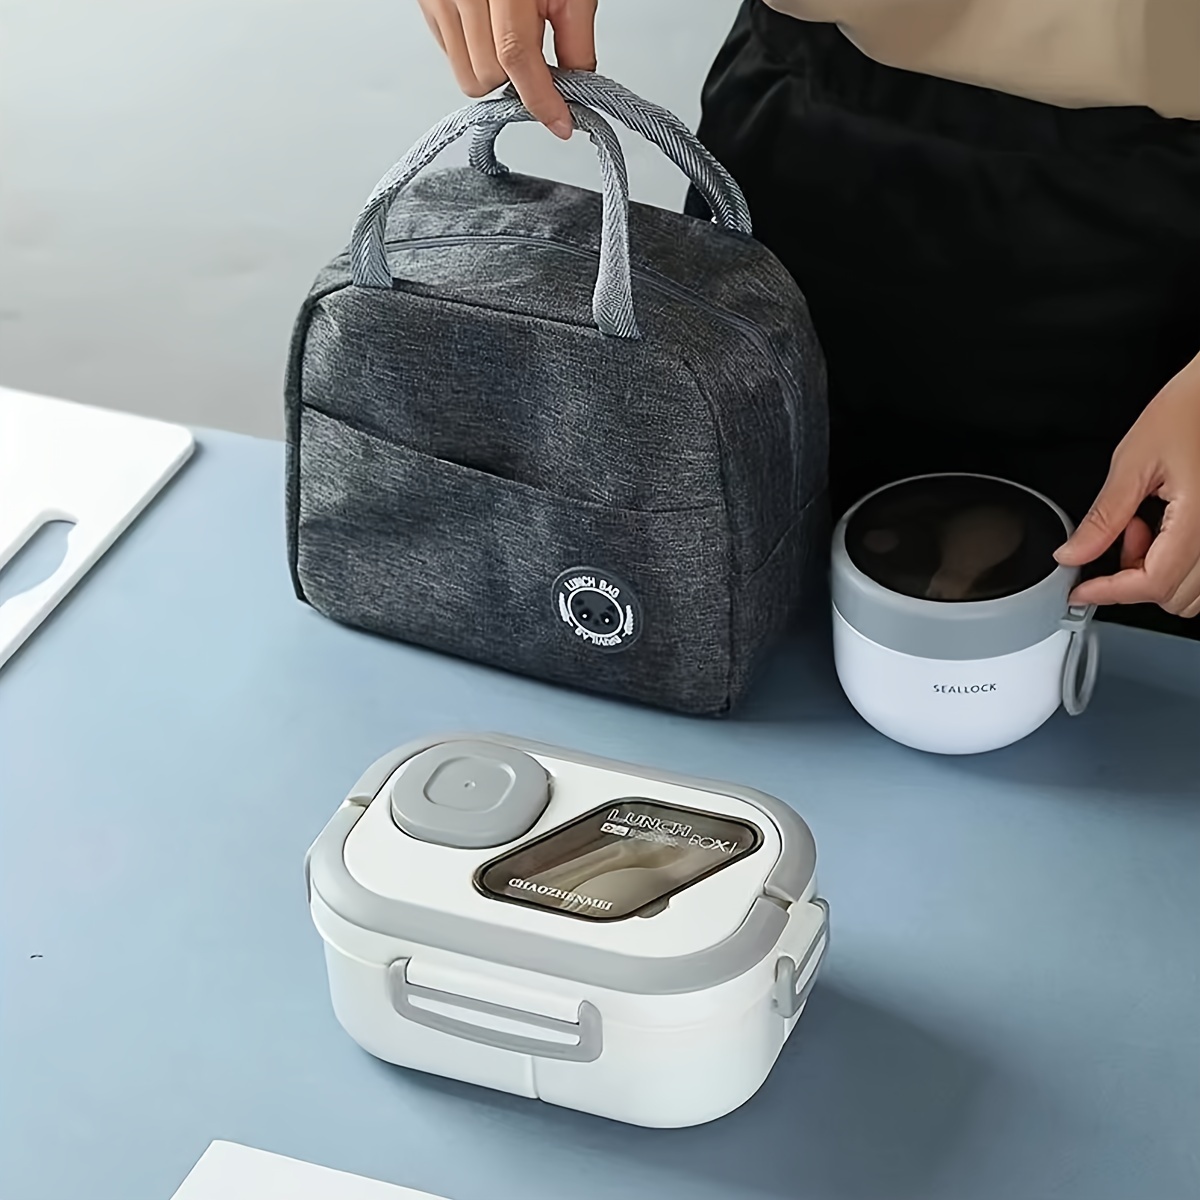 

3pcs/set Portable Lunch Box Bag Set Thermal Bag + Lunch Box + Oatmeal Breakfast Cup, Portable Foldable Aluminum Foil Thermal Bag Lunch Bag With A Pp Thermal Lunch Box And Oatmeal Cup